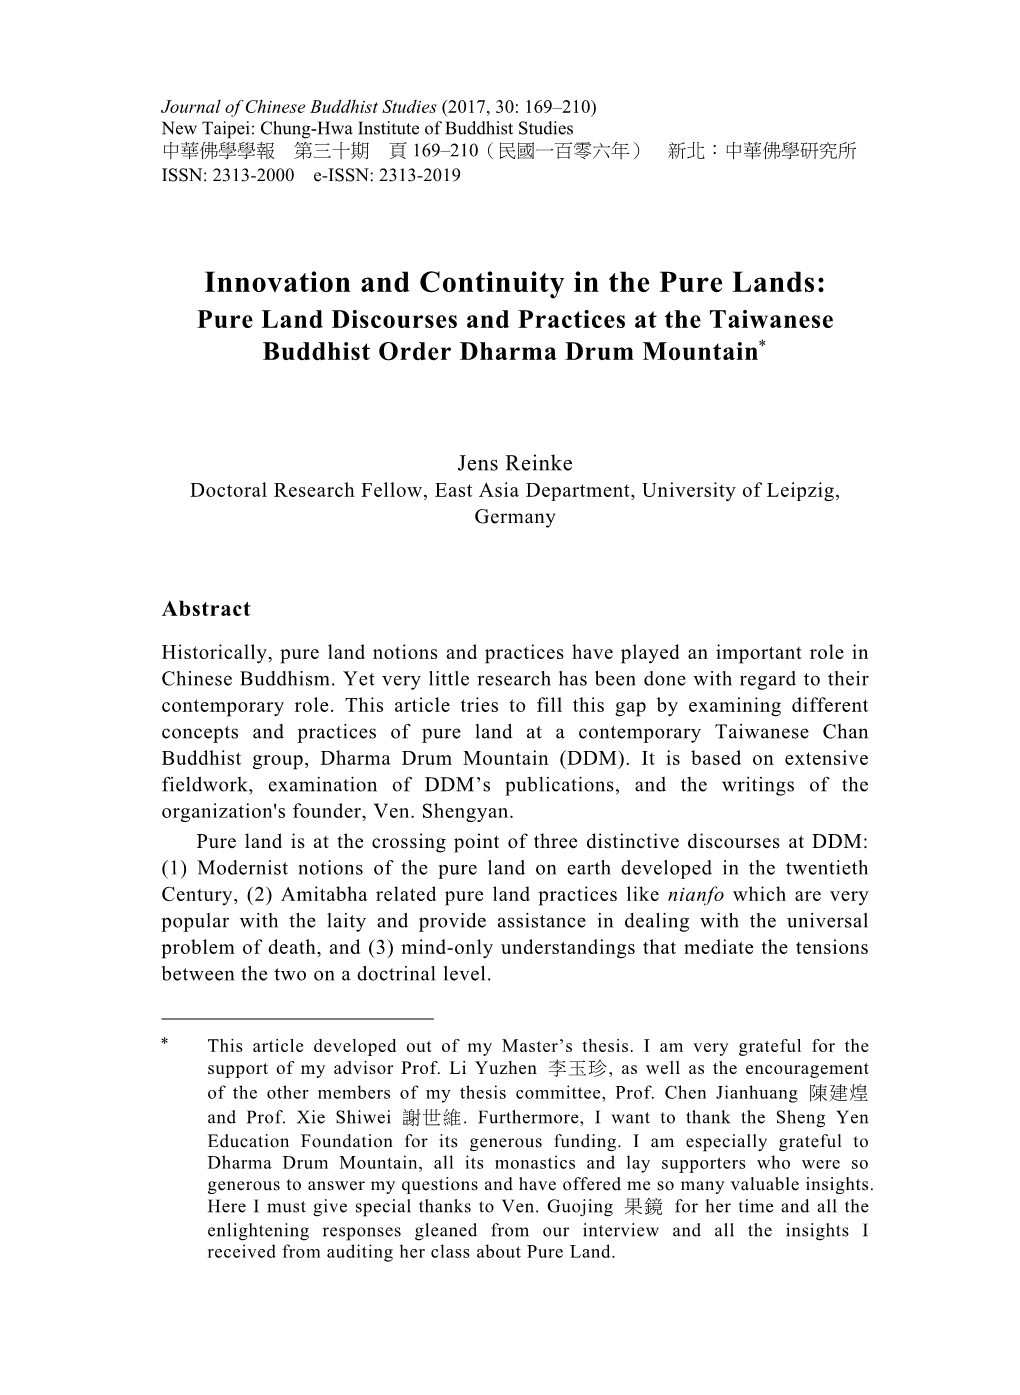 Innovation and Continuity in the Pure Lands: Pure Land Discourses and Practices at the Taiwanese Buddhist Order Dharma Drum Mountain